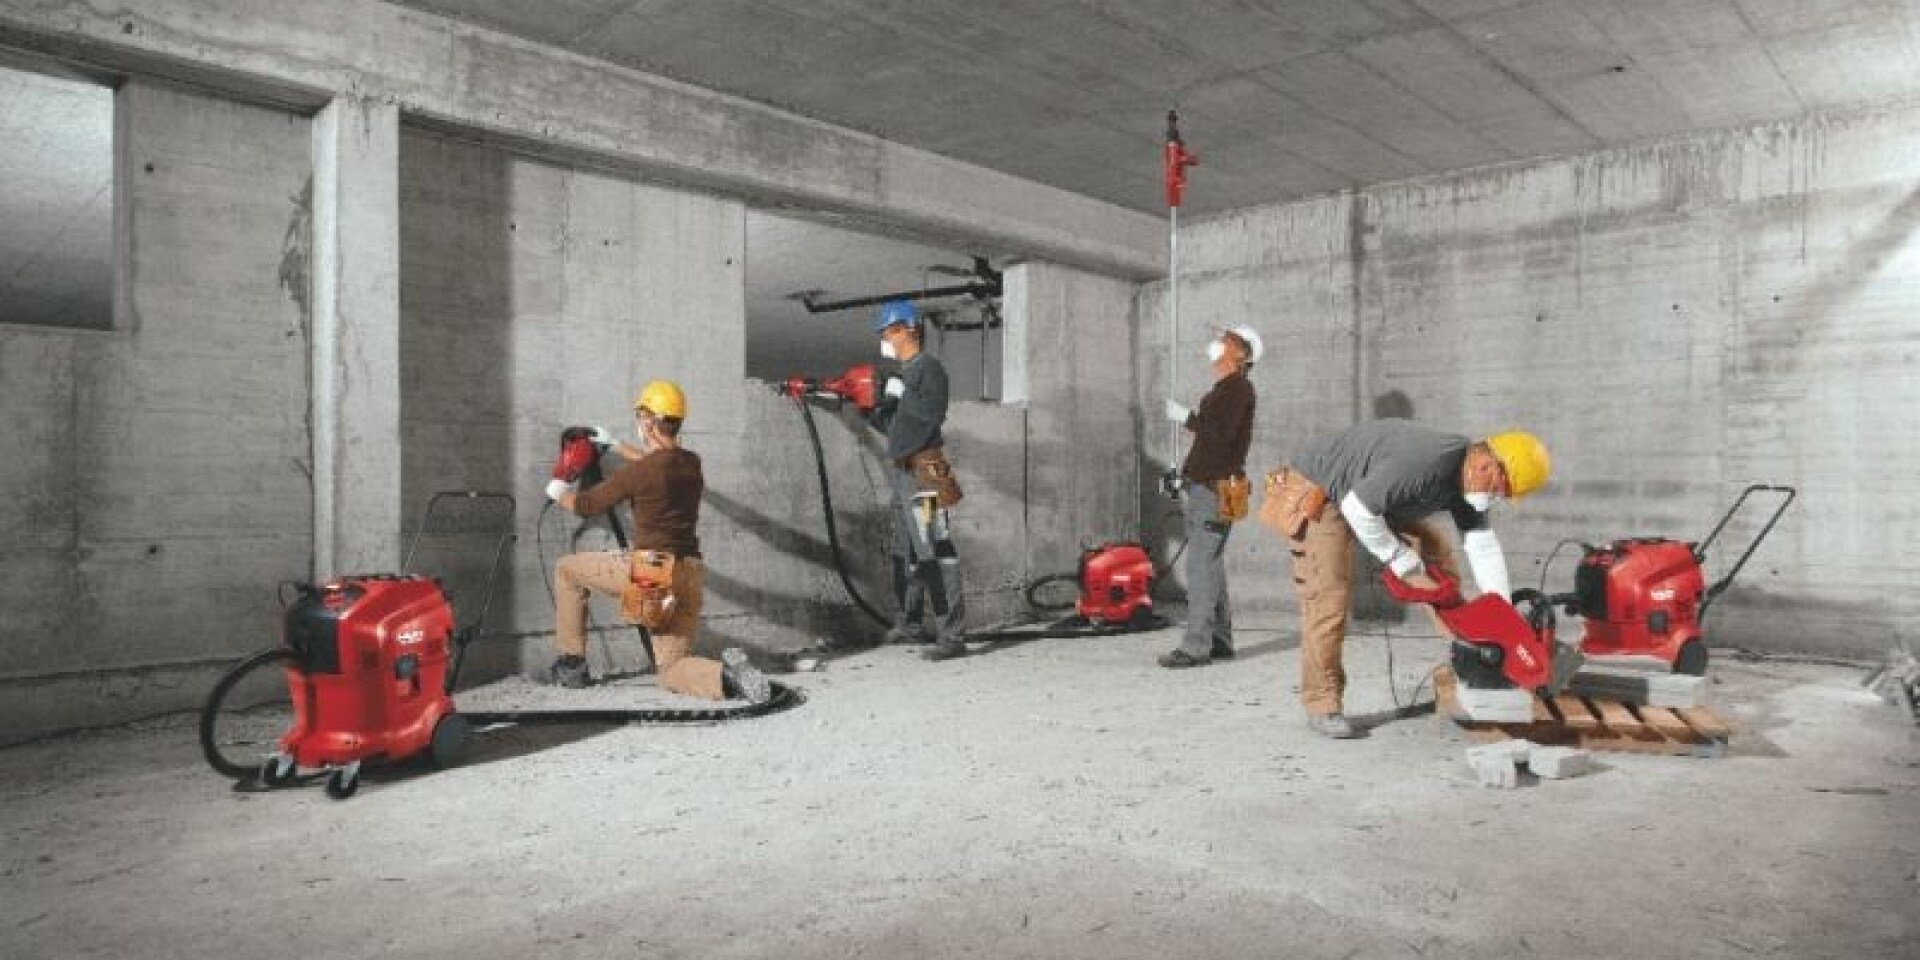 Image of all the full portfolio of Hilti vacuum cleaners being used on the construction site 